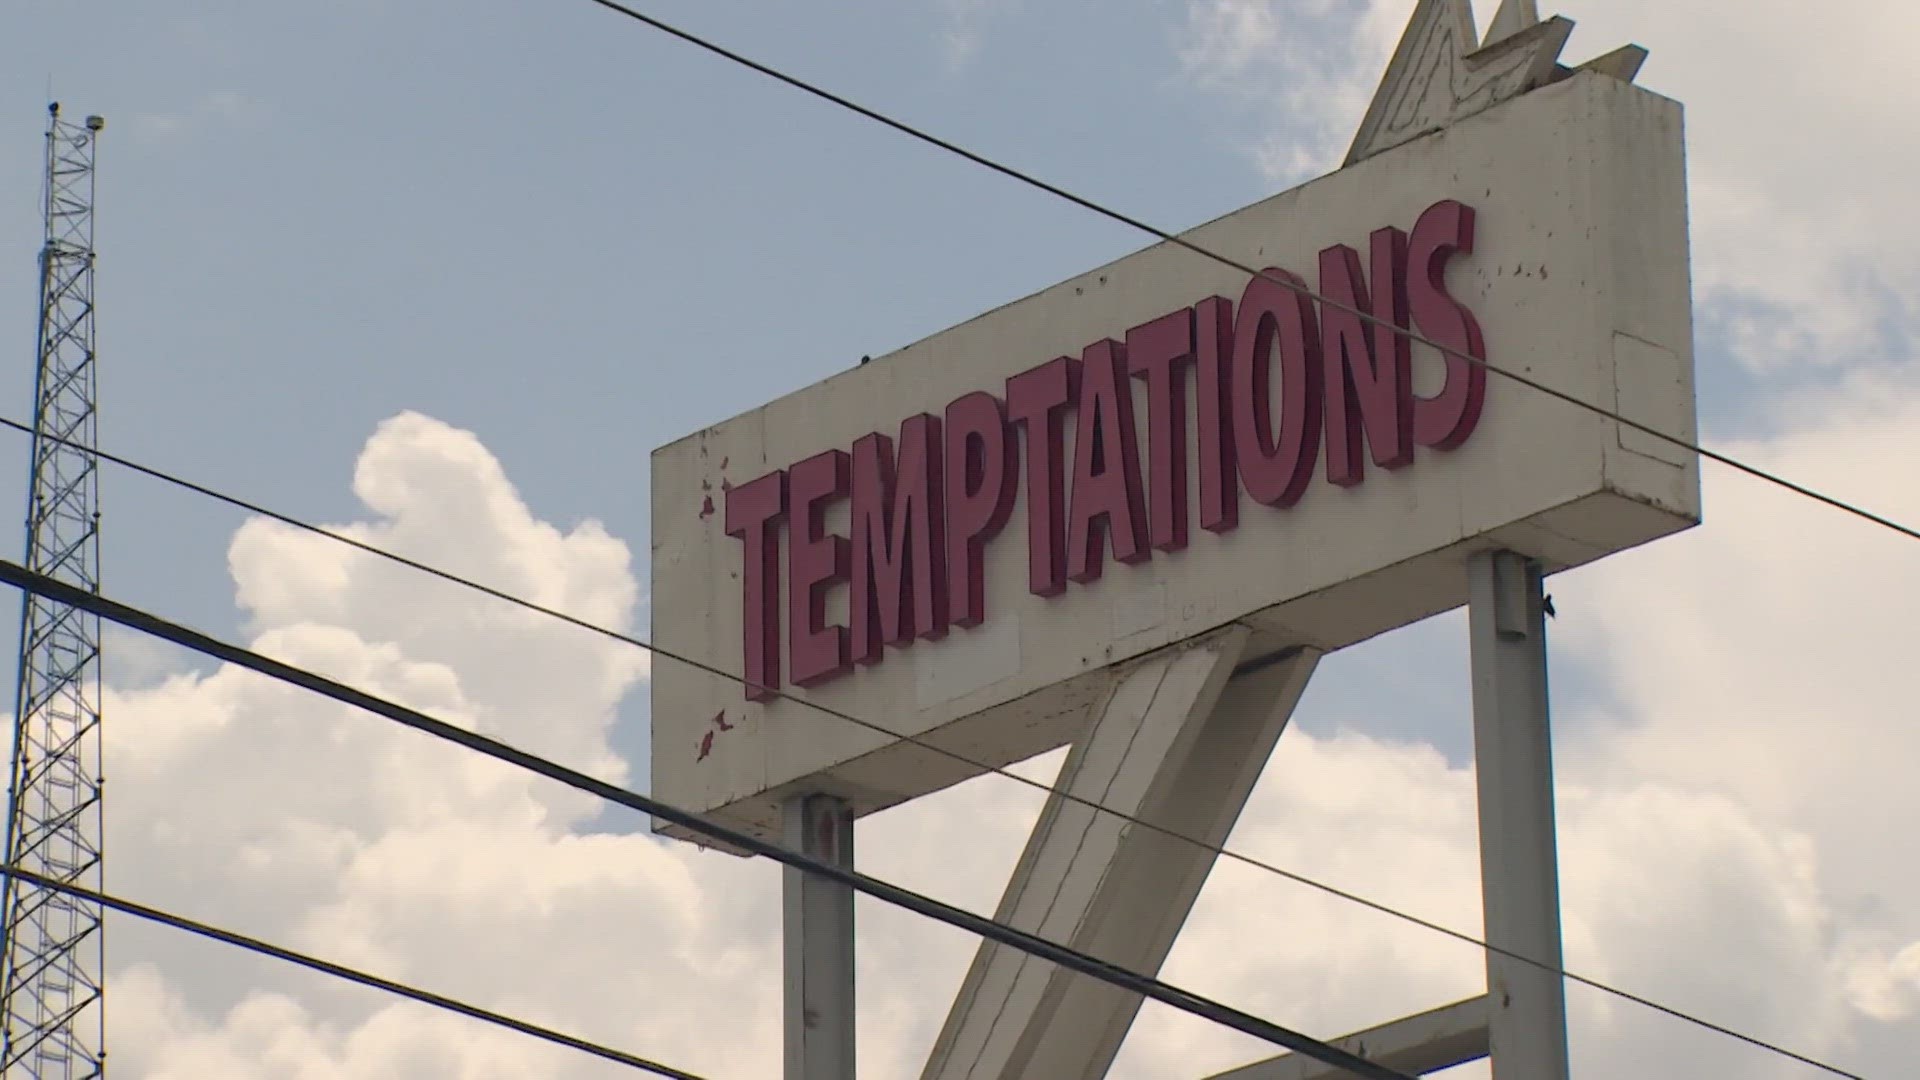 Tarrant County Commissioner Manny Ramirez called the incident a "shootout" and said Temptations has displayed "a clear pattern of dangerous criminal activity."